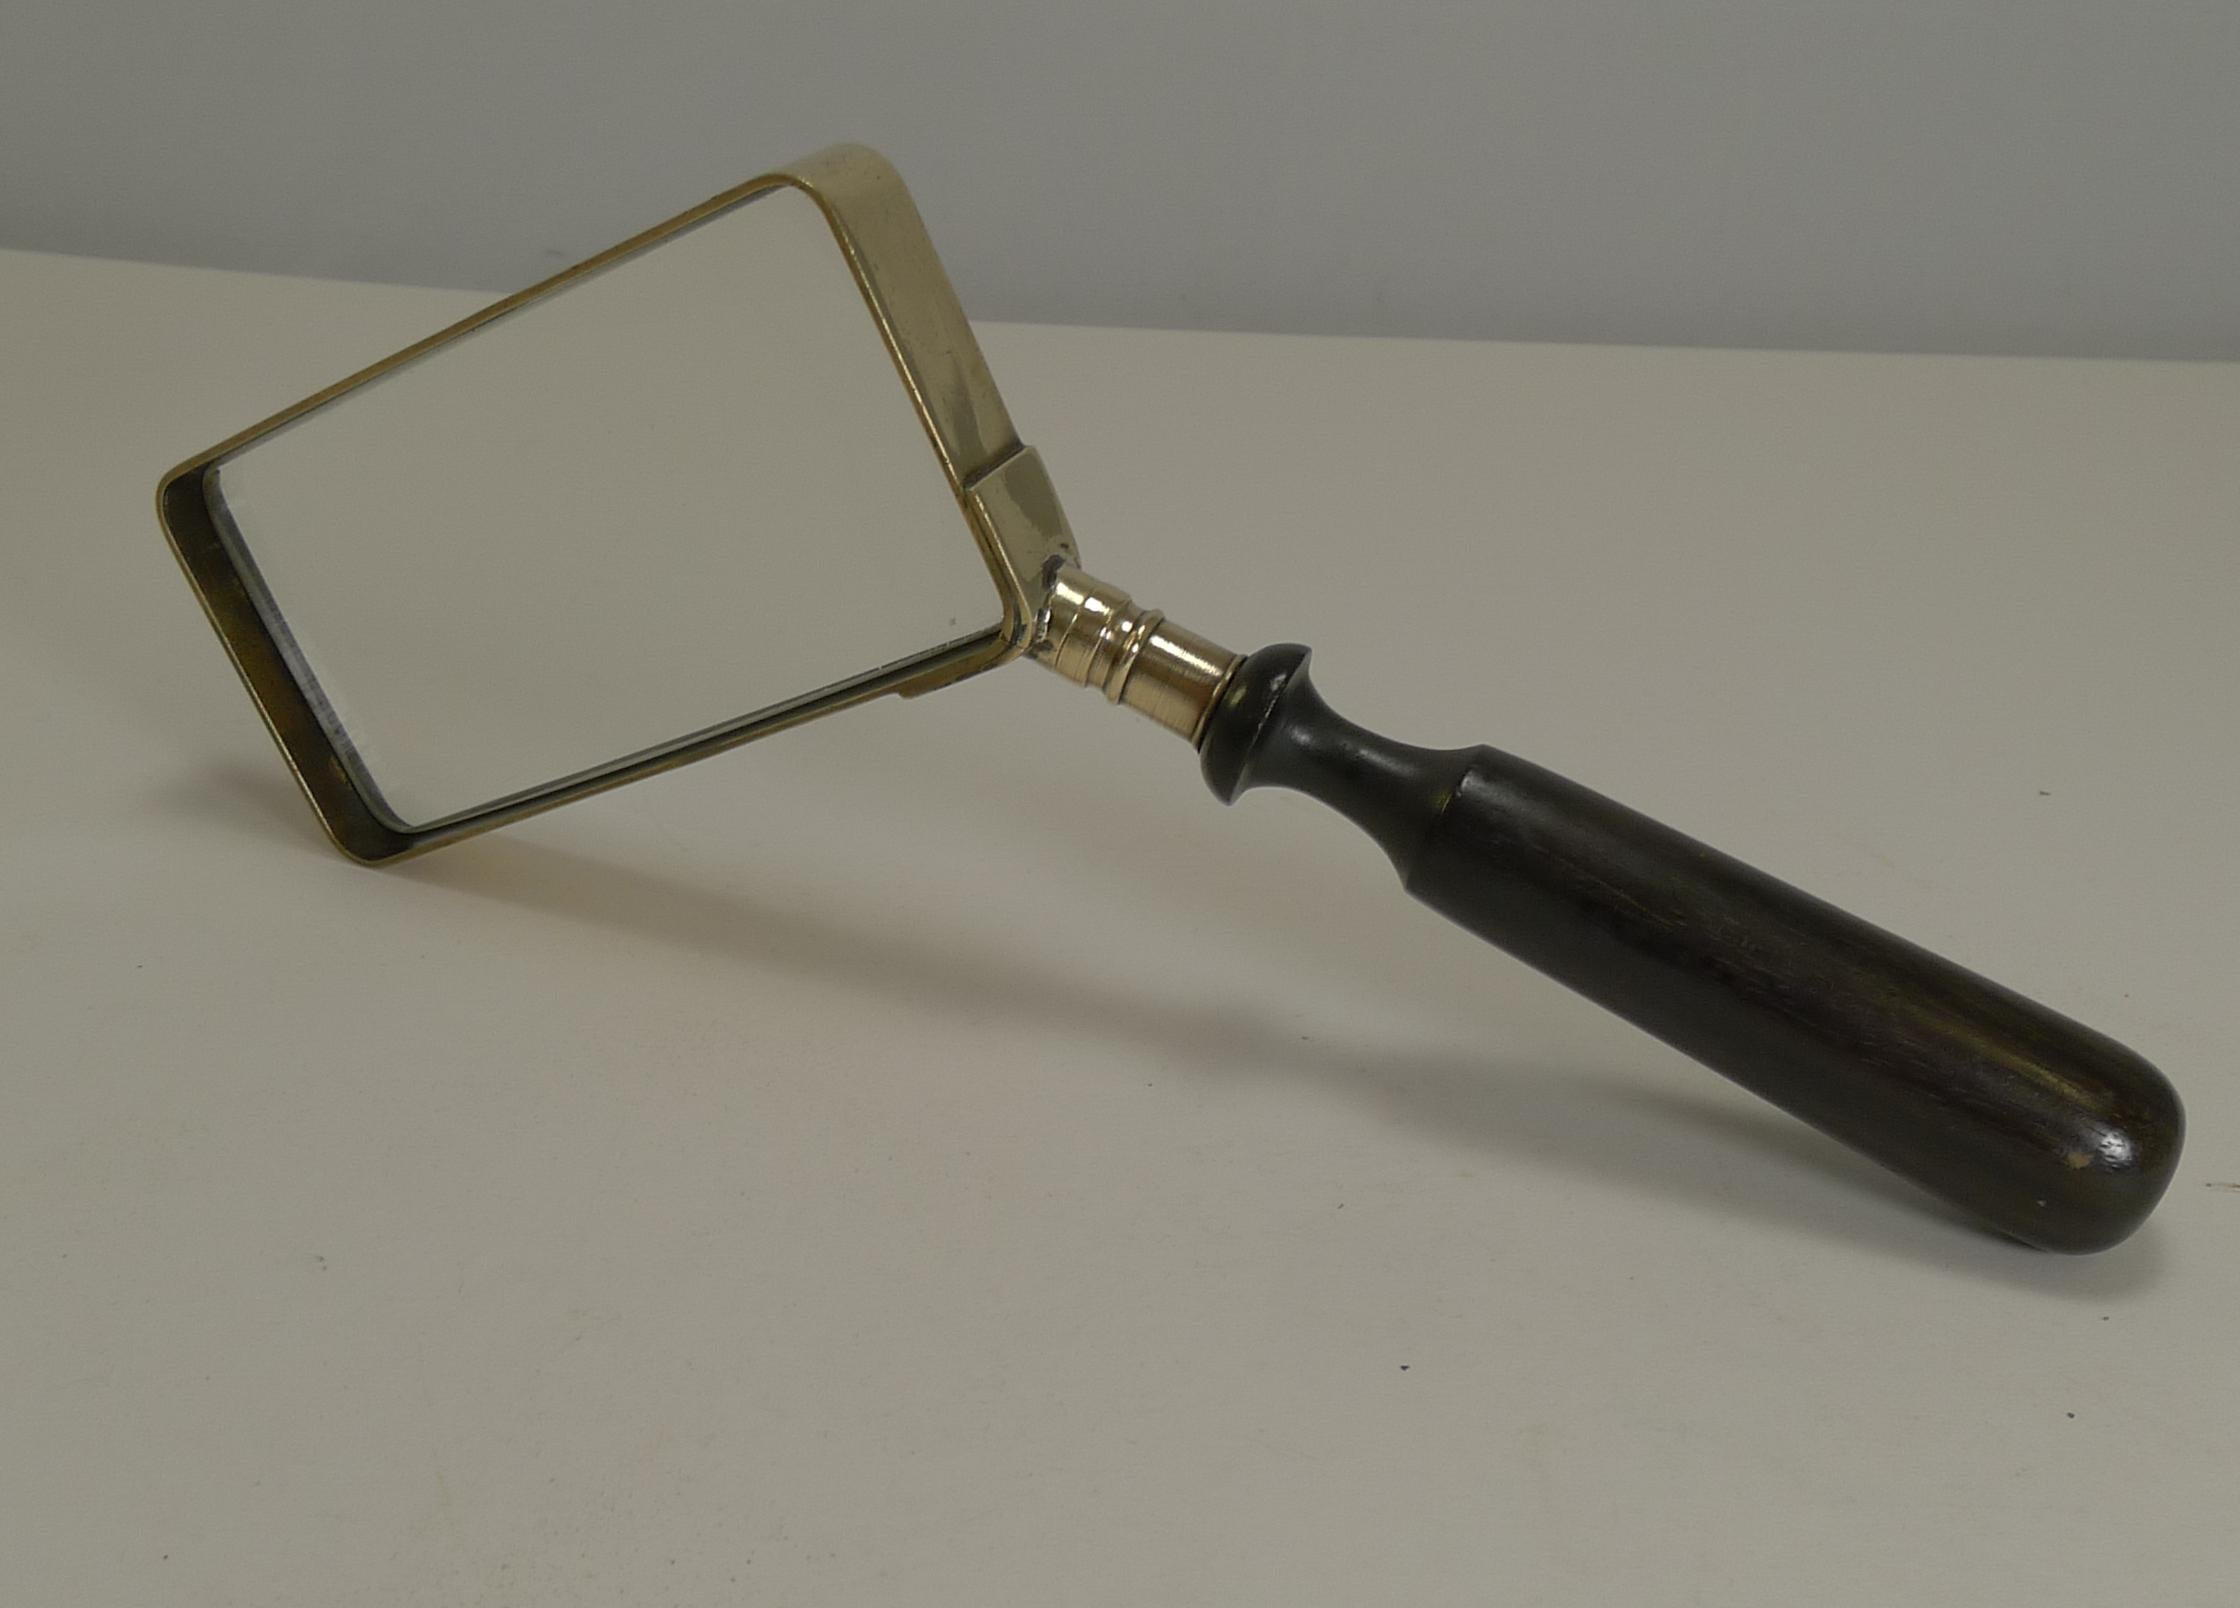 A handsome Edwardian brass framed rectangular magnifying glass polished to gleam. The handle is made from turned ebony wood and unusually and conveniently to the side making it a very usable piece to read with.

Dating to circa 1900, the glass is